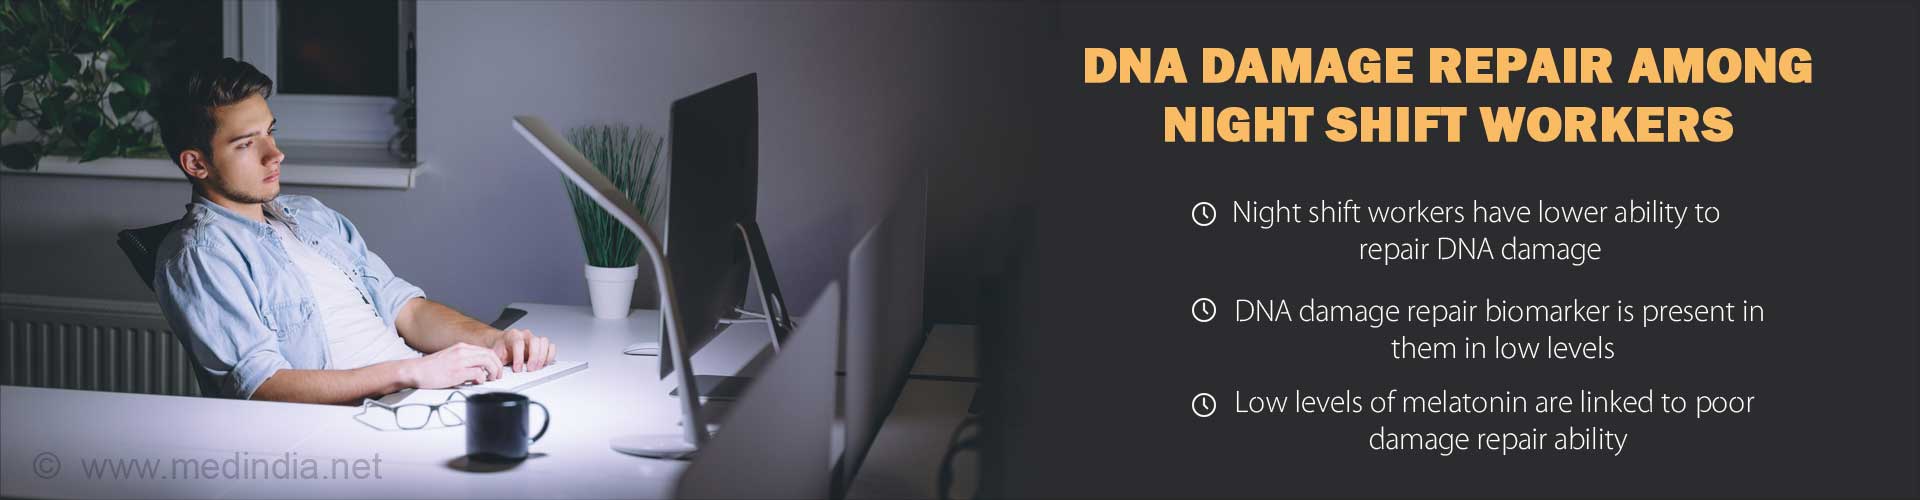 DNA damage repair among night shift workers
- Night shift workers have lower ability to repair DNA damage
- DNA damage repair biomarker is present in them in low levels
- Low levels of melatonin are linked to poor damage repair ability